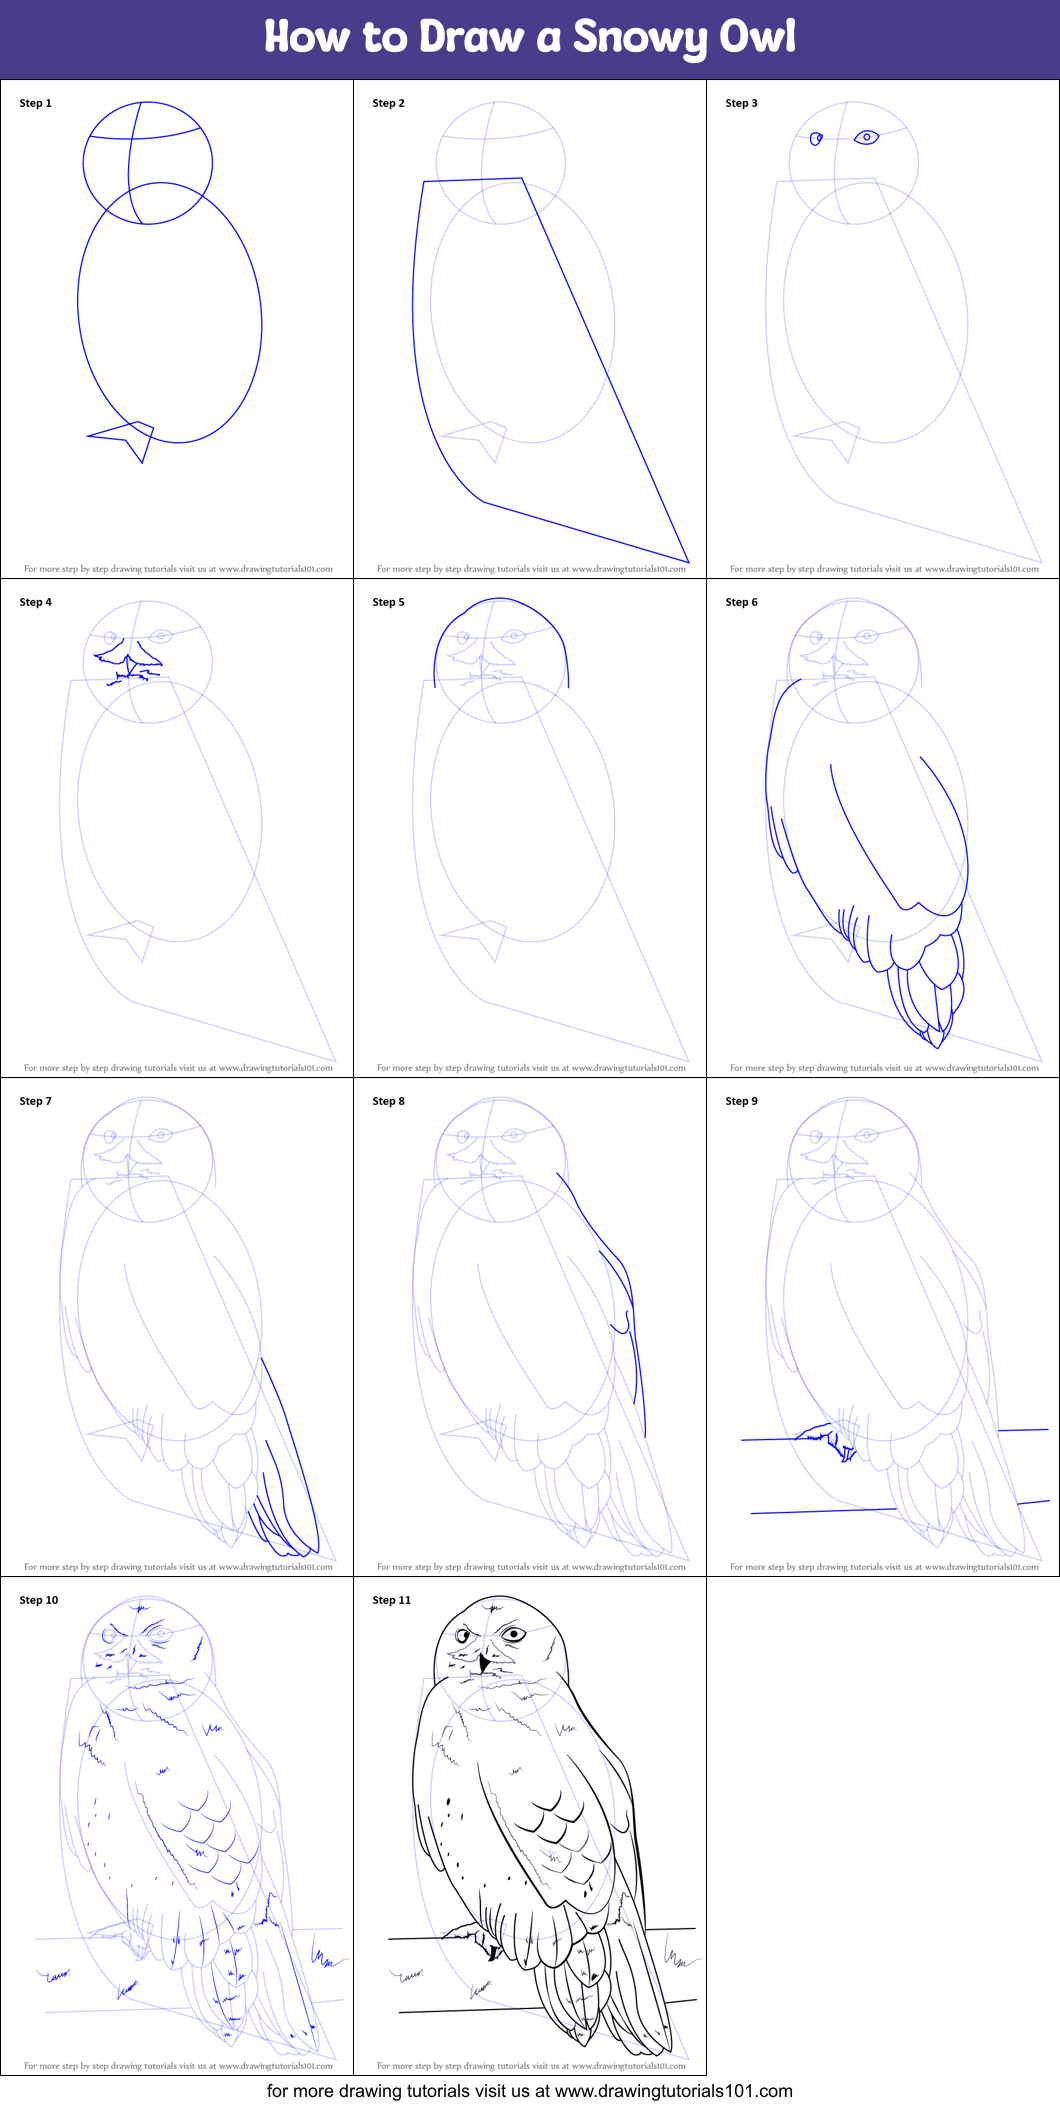 How to Draw a Snowy Owl printable step by step drawing sheet